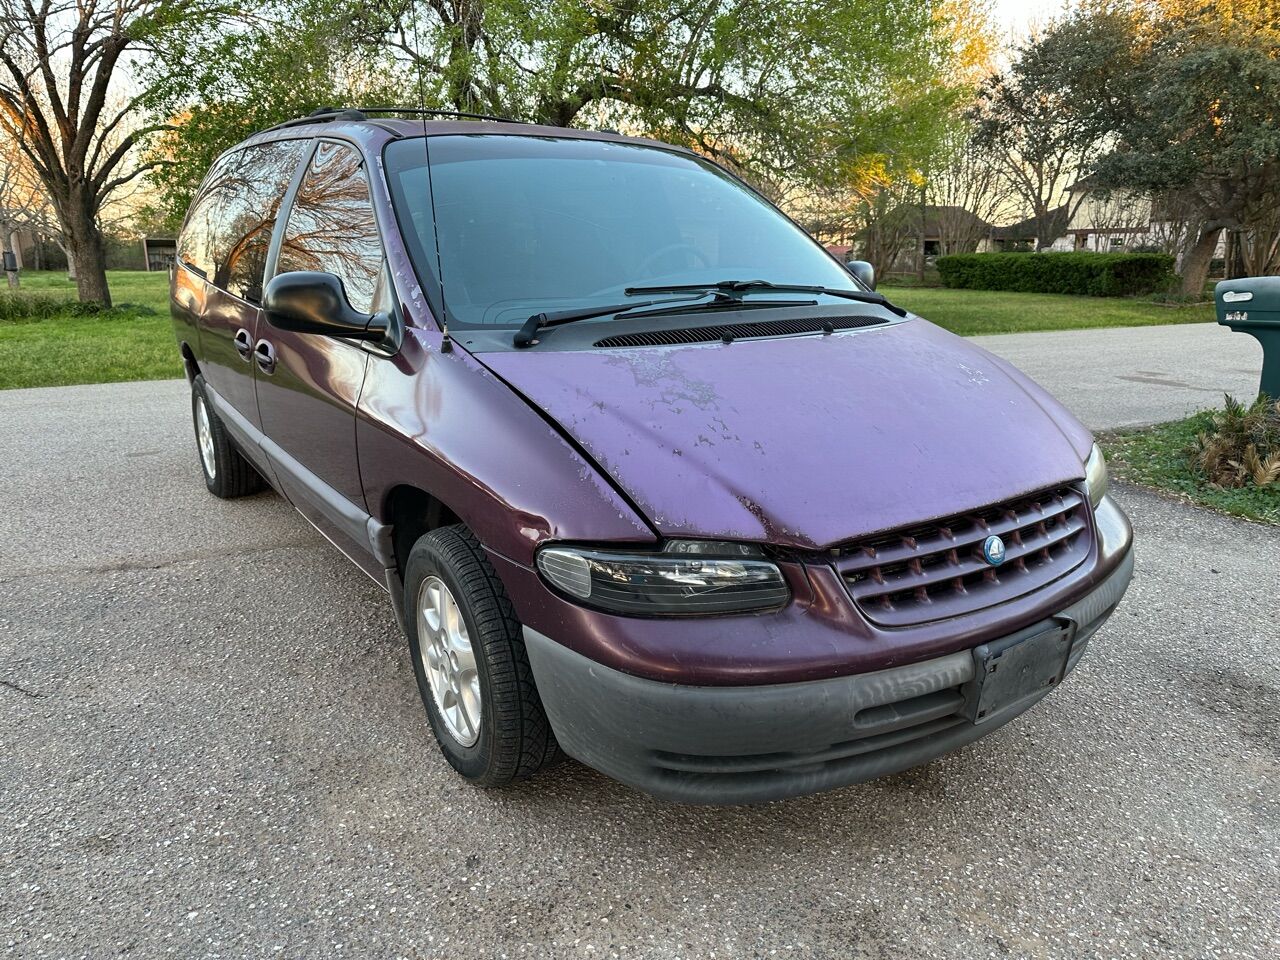 Plymouth Grand Voyager For Sale - Carsforsale.com®